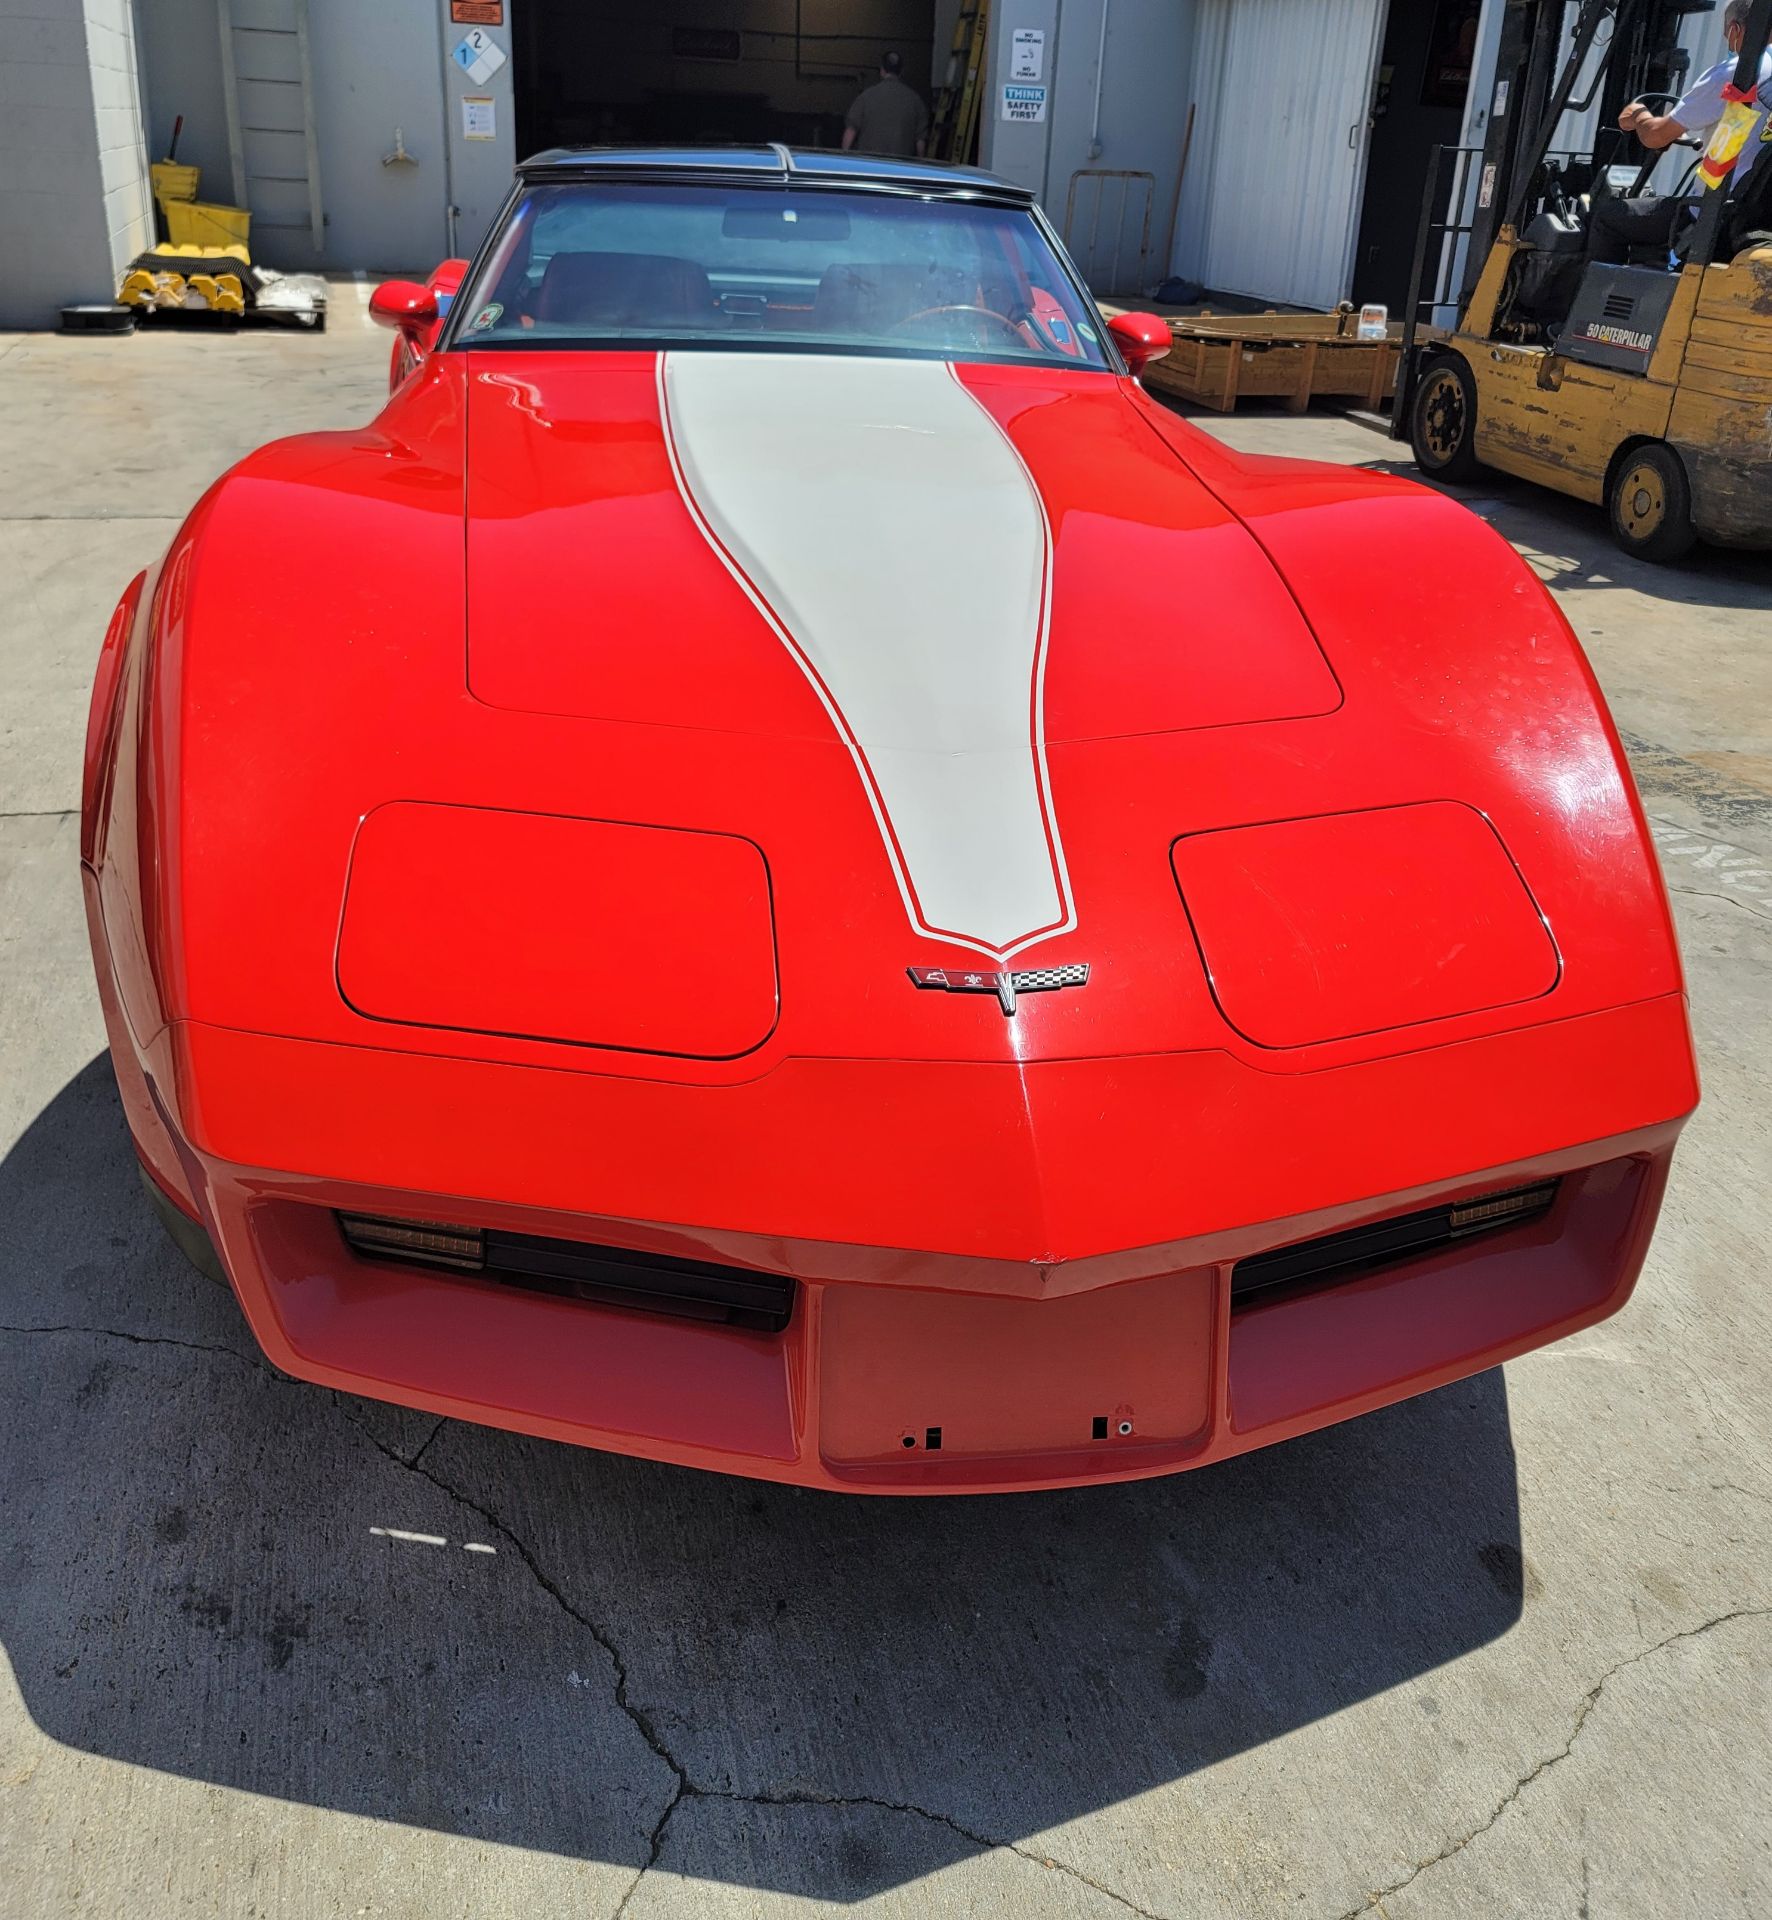 1980 CHEVROLET CORVETTE, WAS VIC EDELBROCK'S PERSONAL CAR BOUGHT FOR R&D, RED INTERIOR, TITLE ONLY. - Image 7 of 70